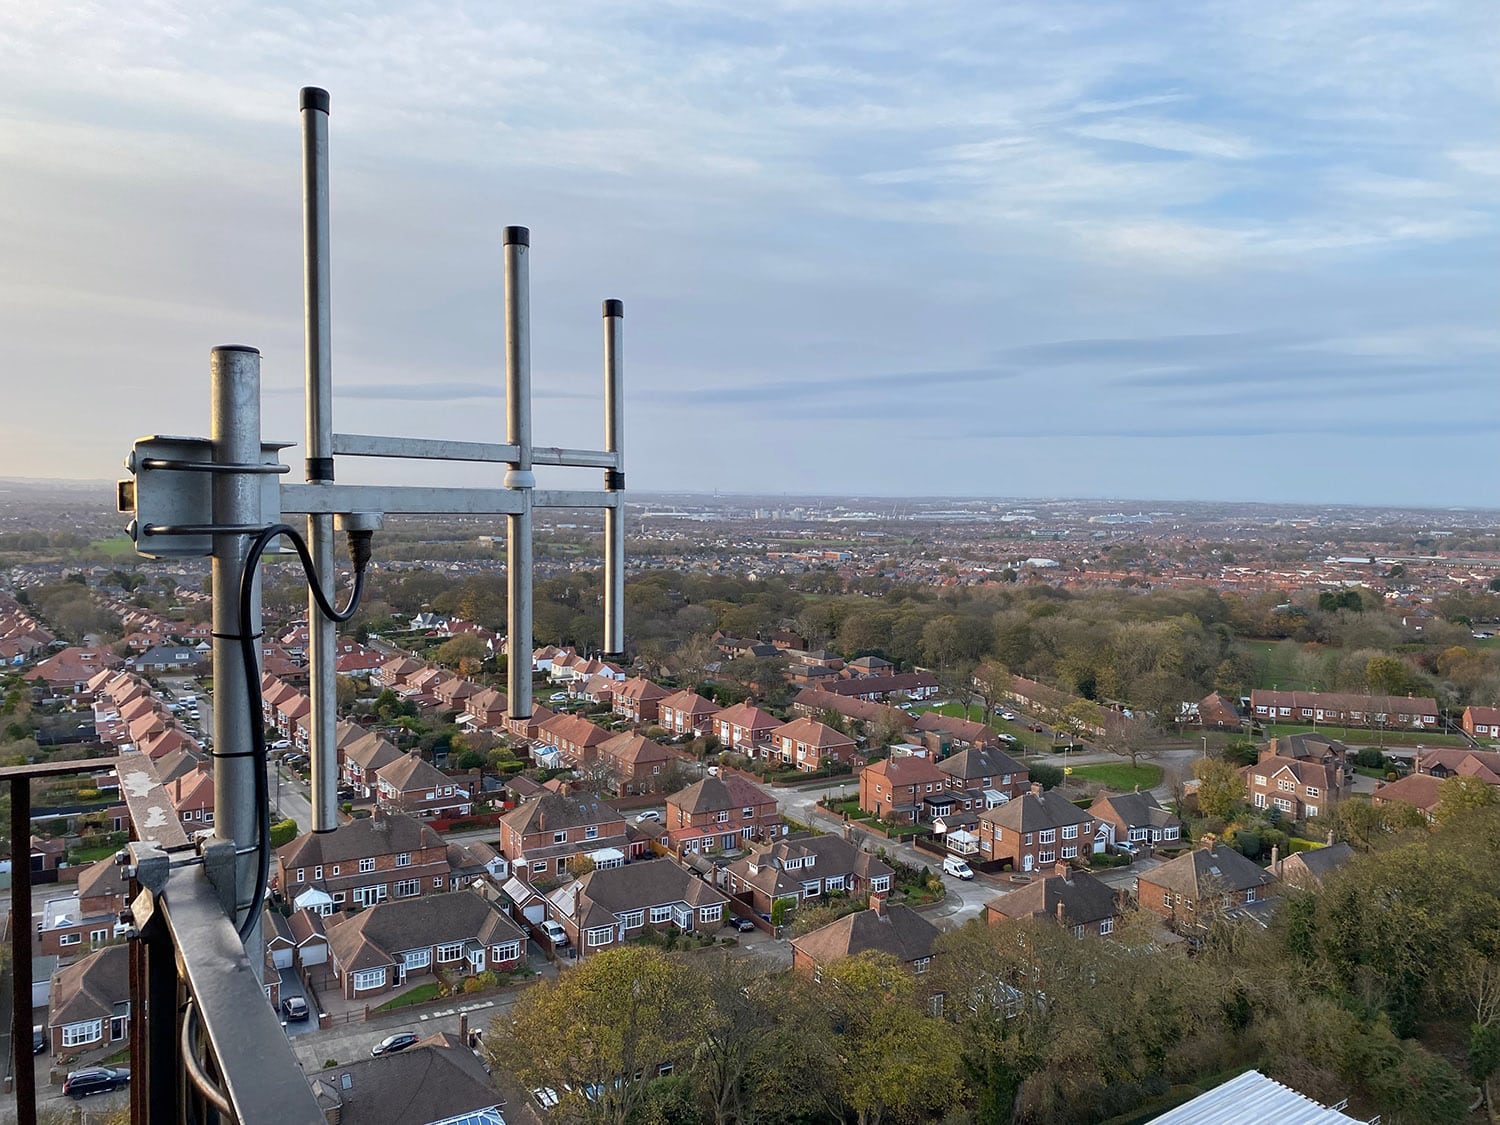 View from the MUX ONE transmitter site at Cleadon Water Tower, showing the recently installed directional DAB antenna.